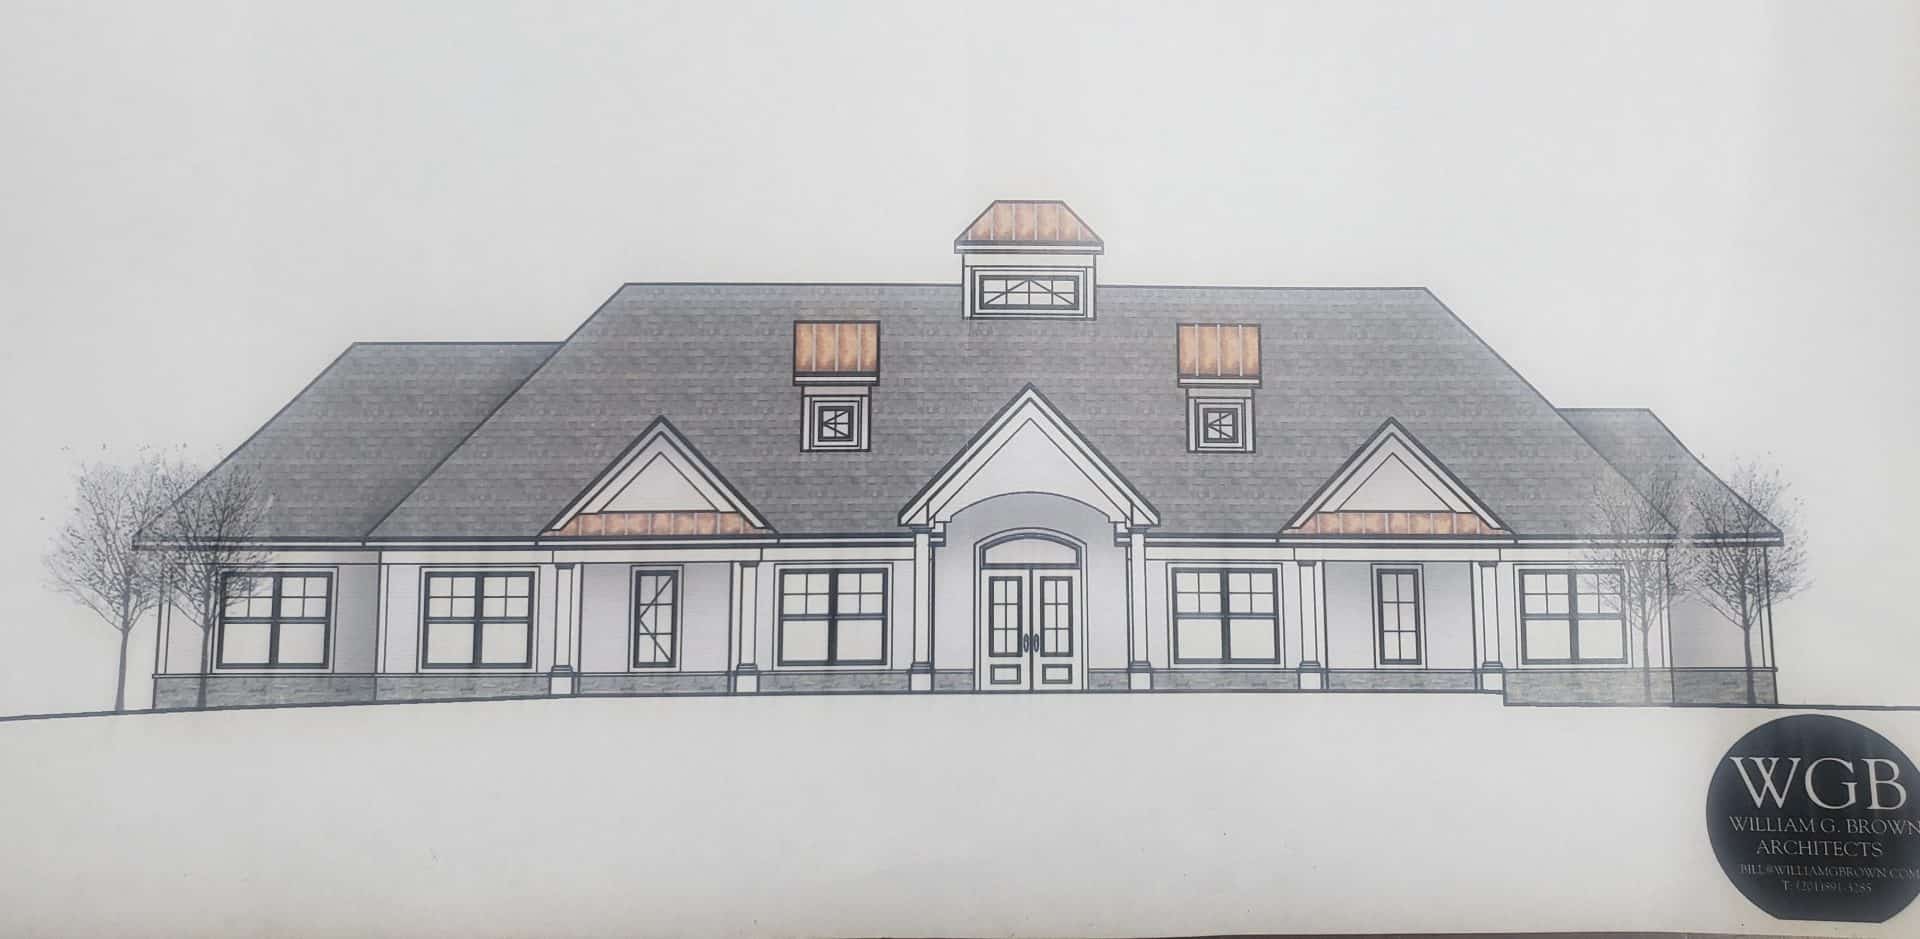 Architect drawing of a new ranch style home under contsruction.